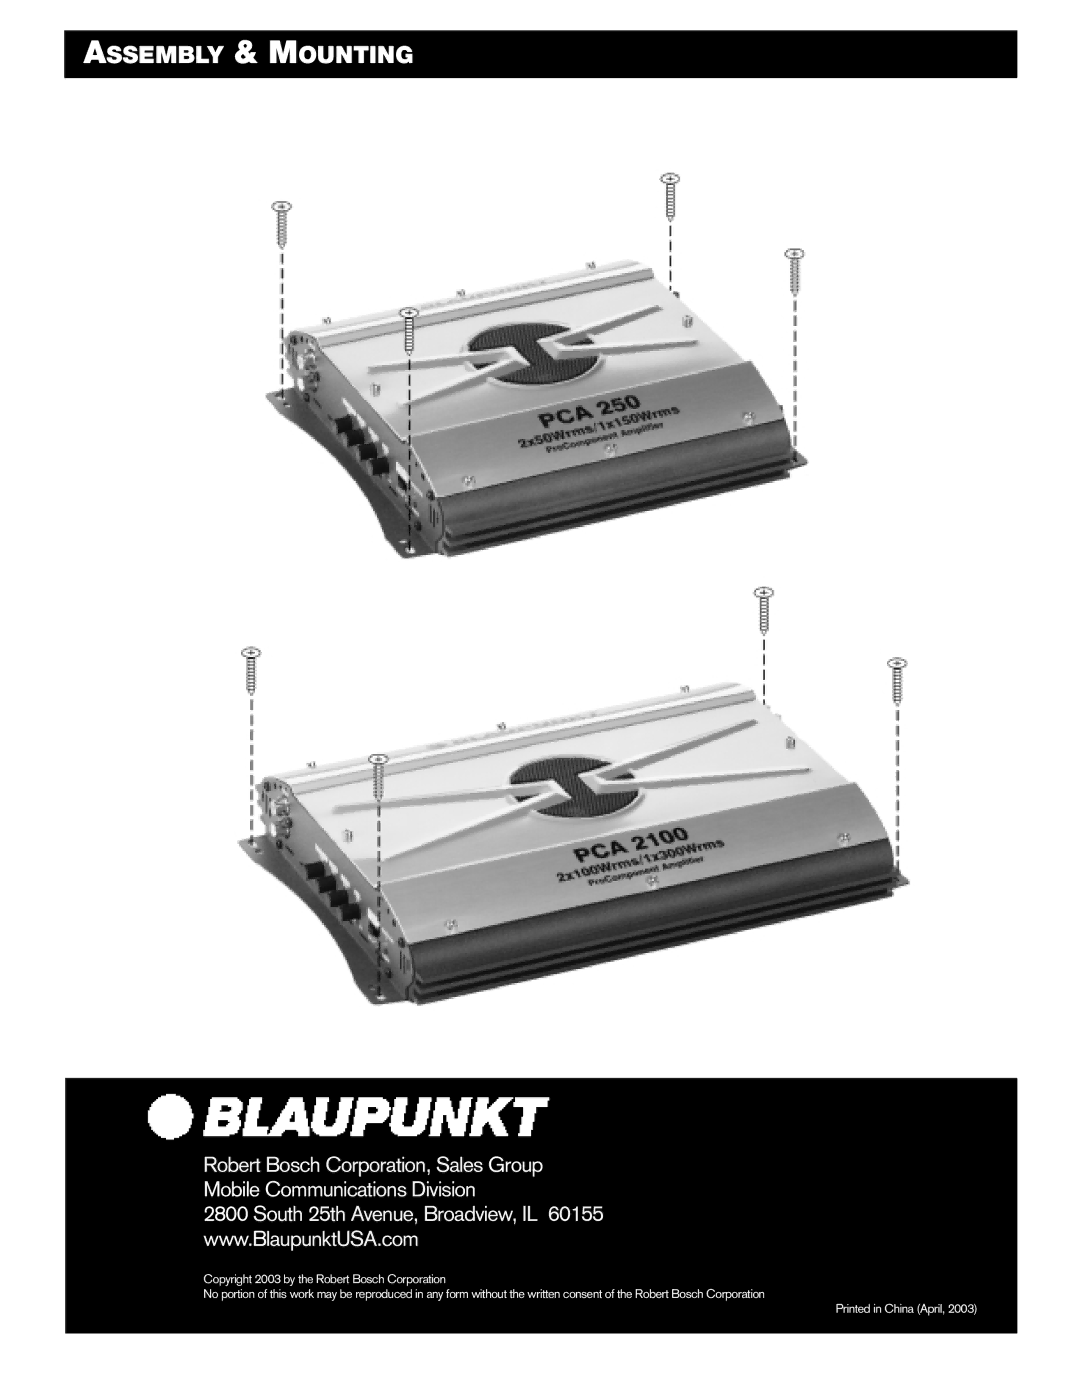 Blaupunkt PCA 2100, PCA 250 manual Assembly & Mounting 